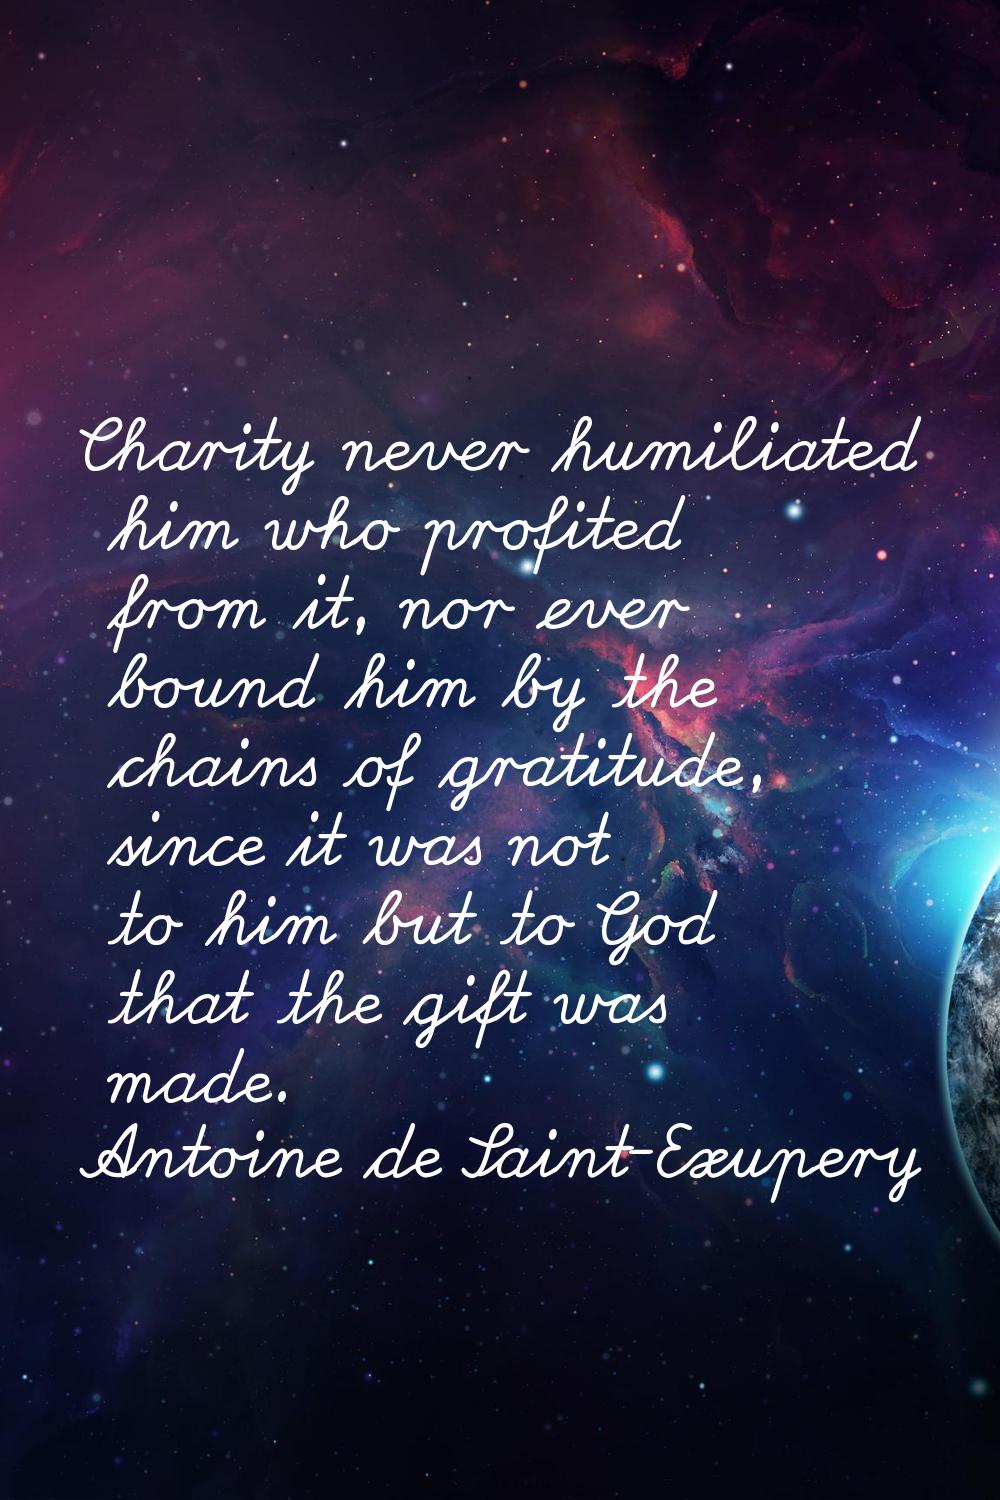 Charity never humiliated him who profited from it, nor ever bound him by the chains of gratitude, s